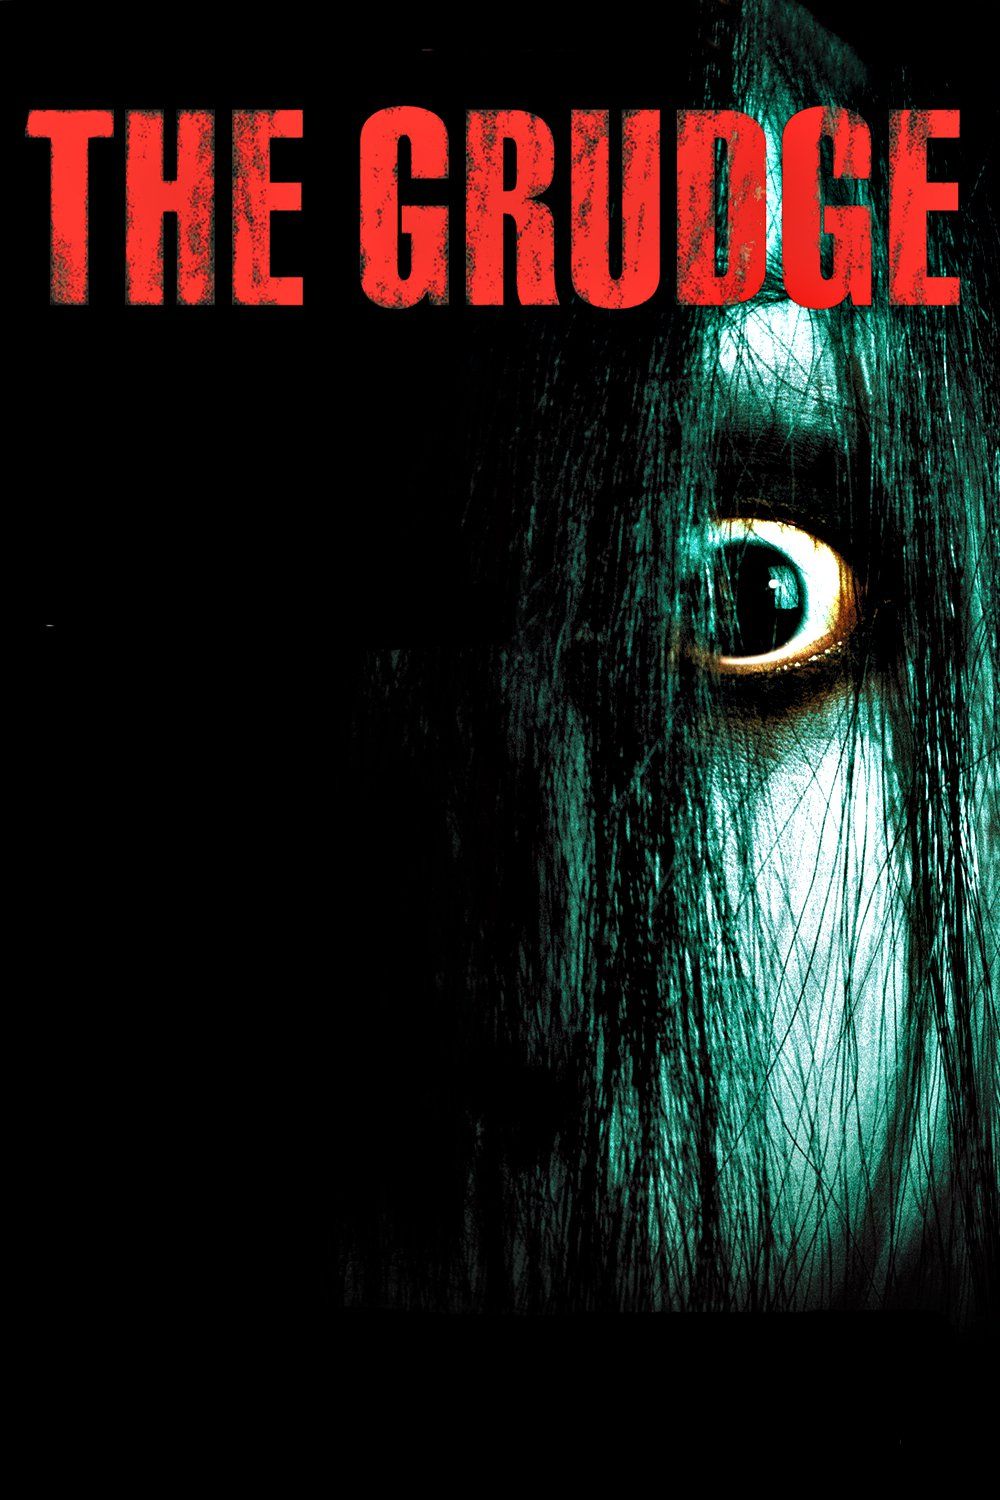 The Grudge Movie Poster